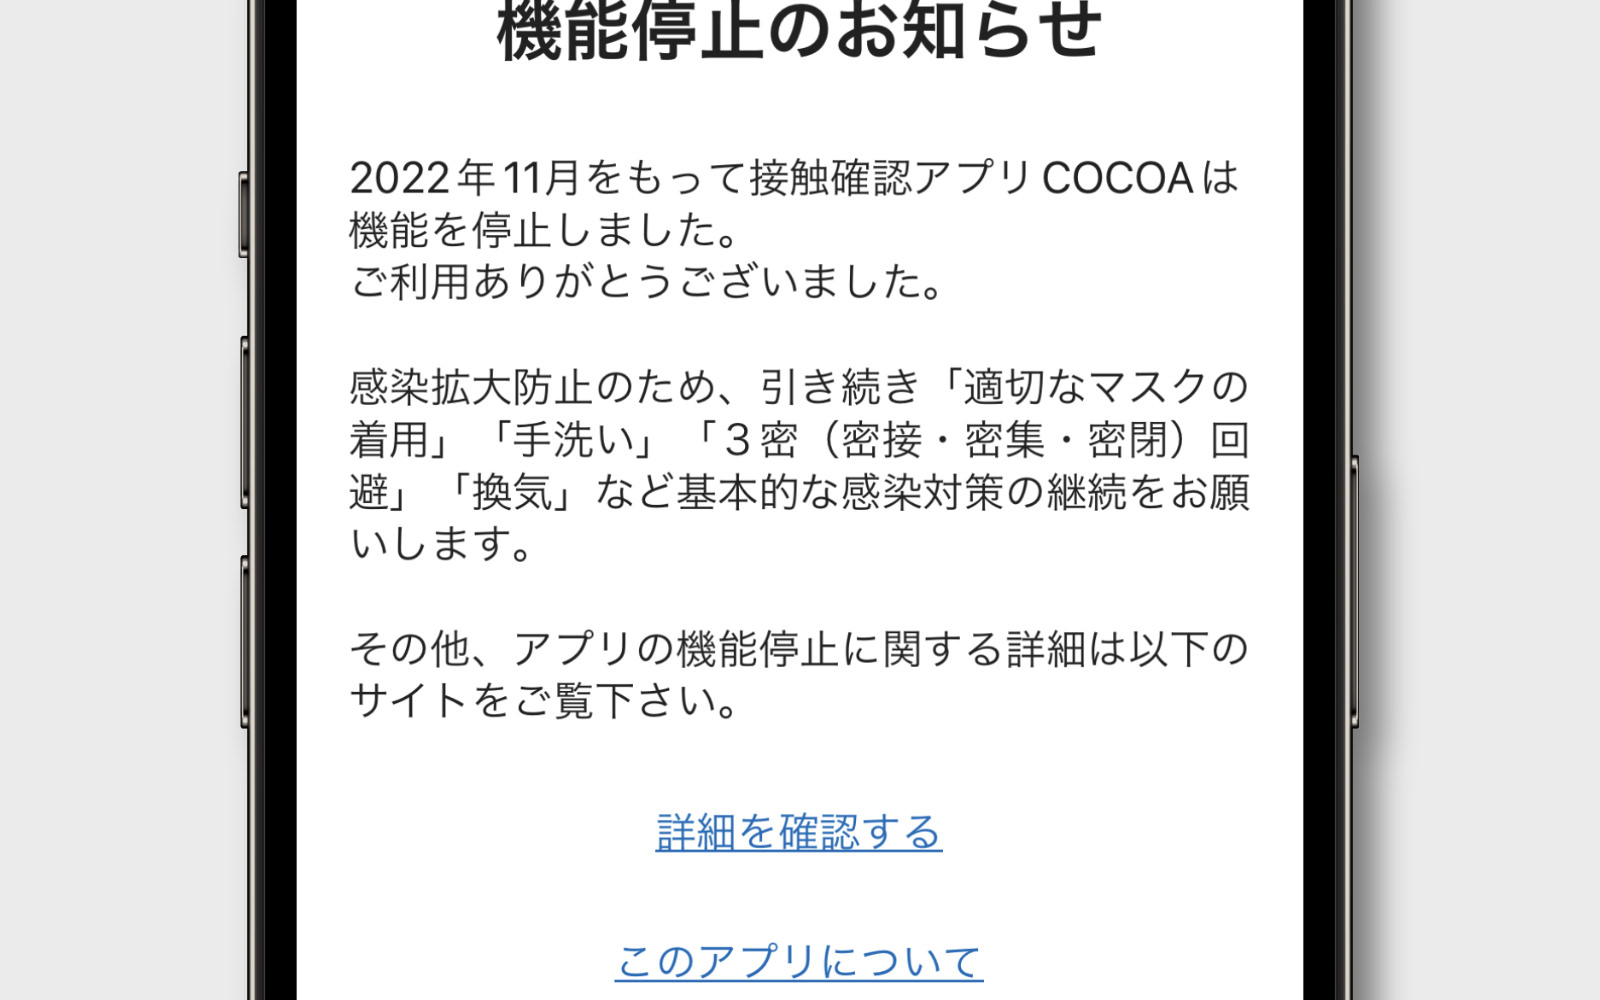 COCOA had ended